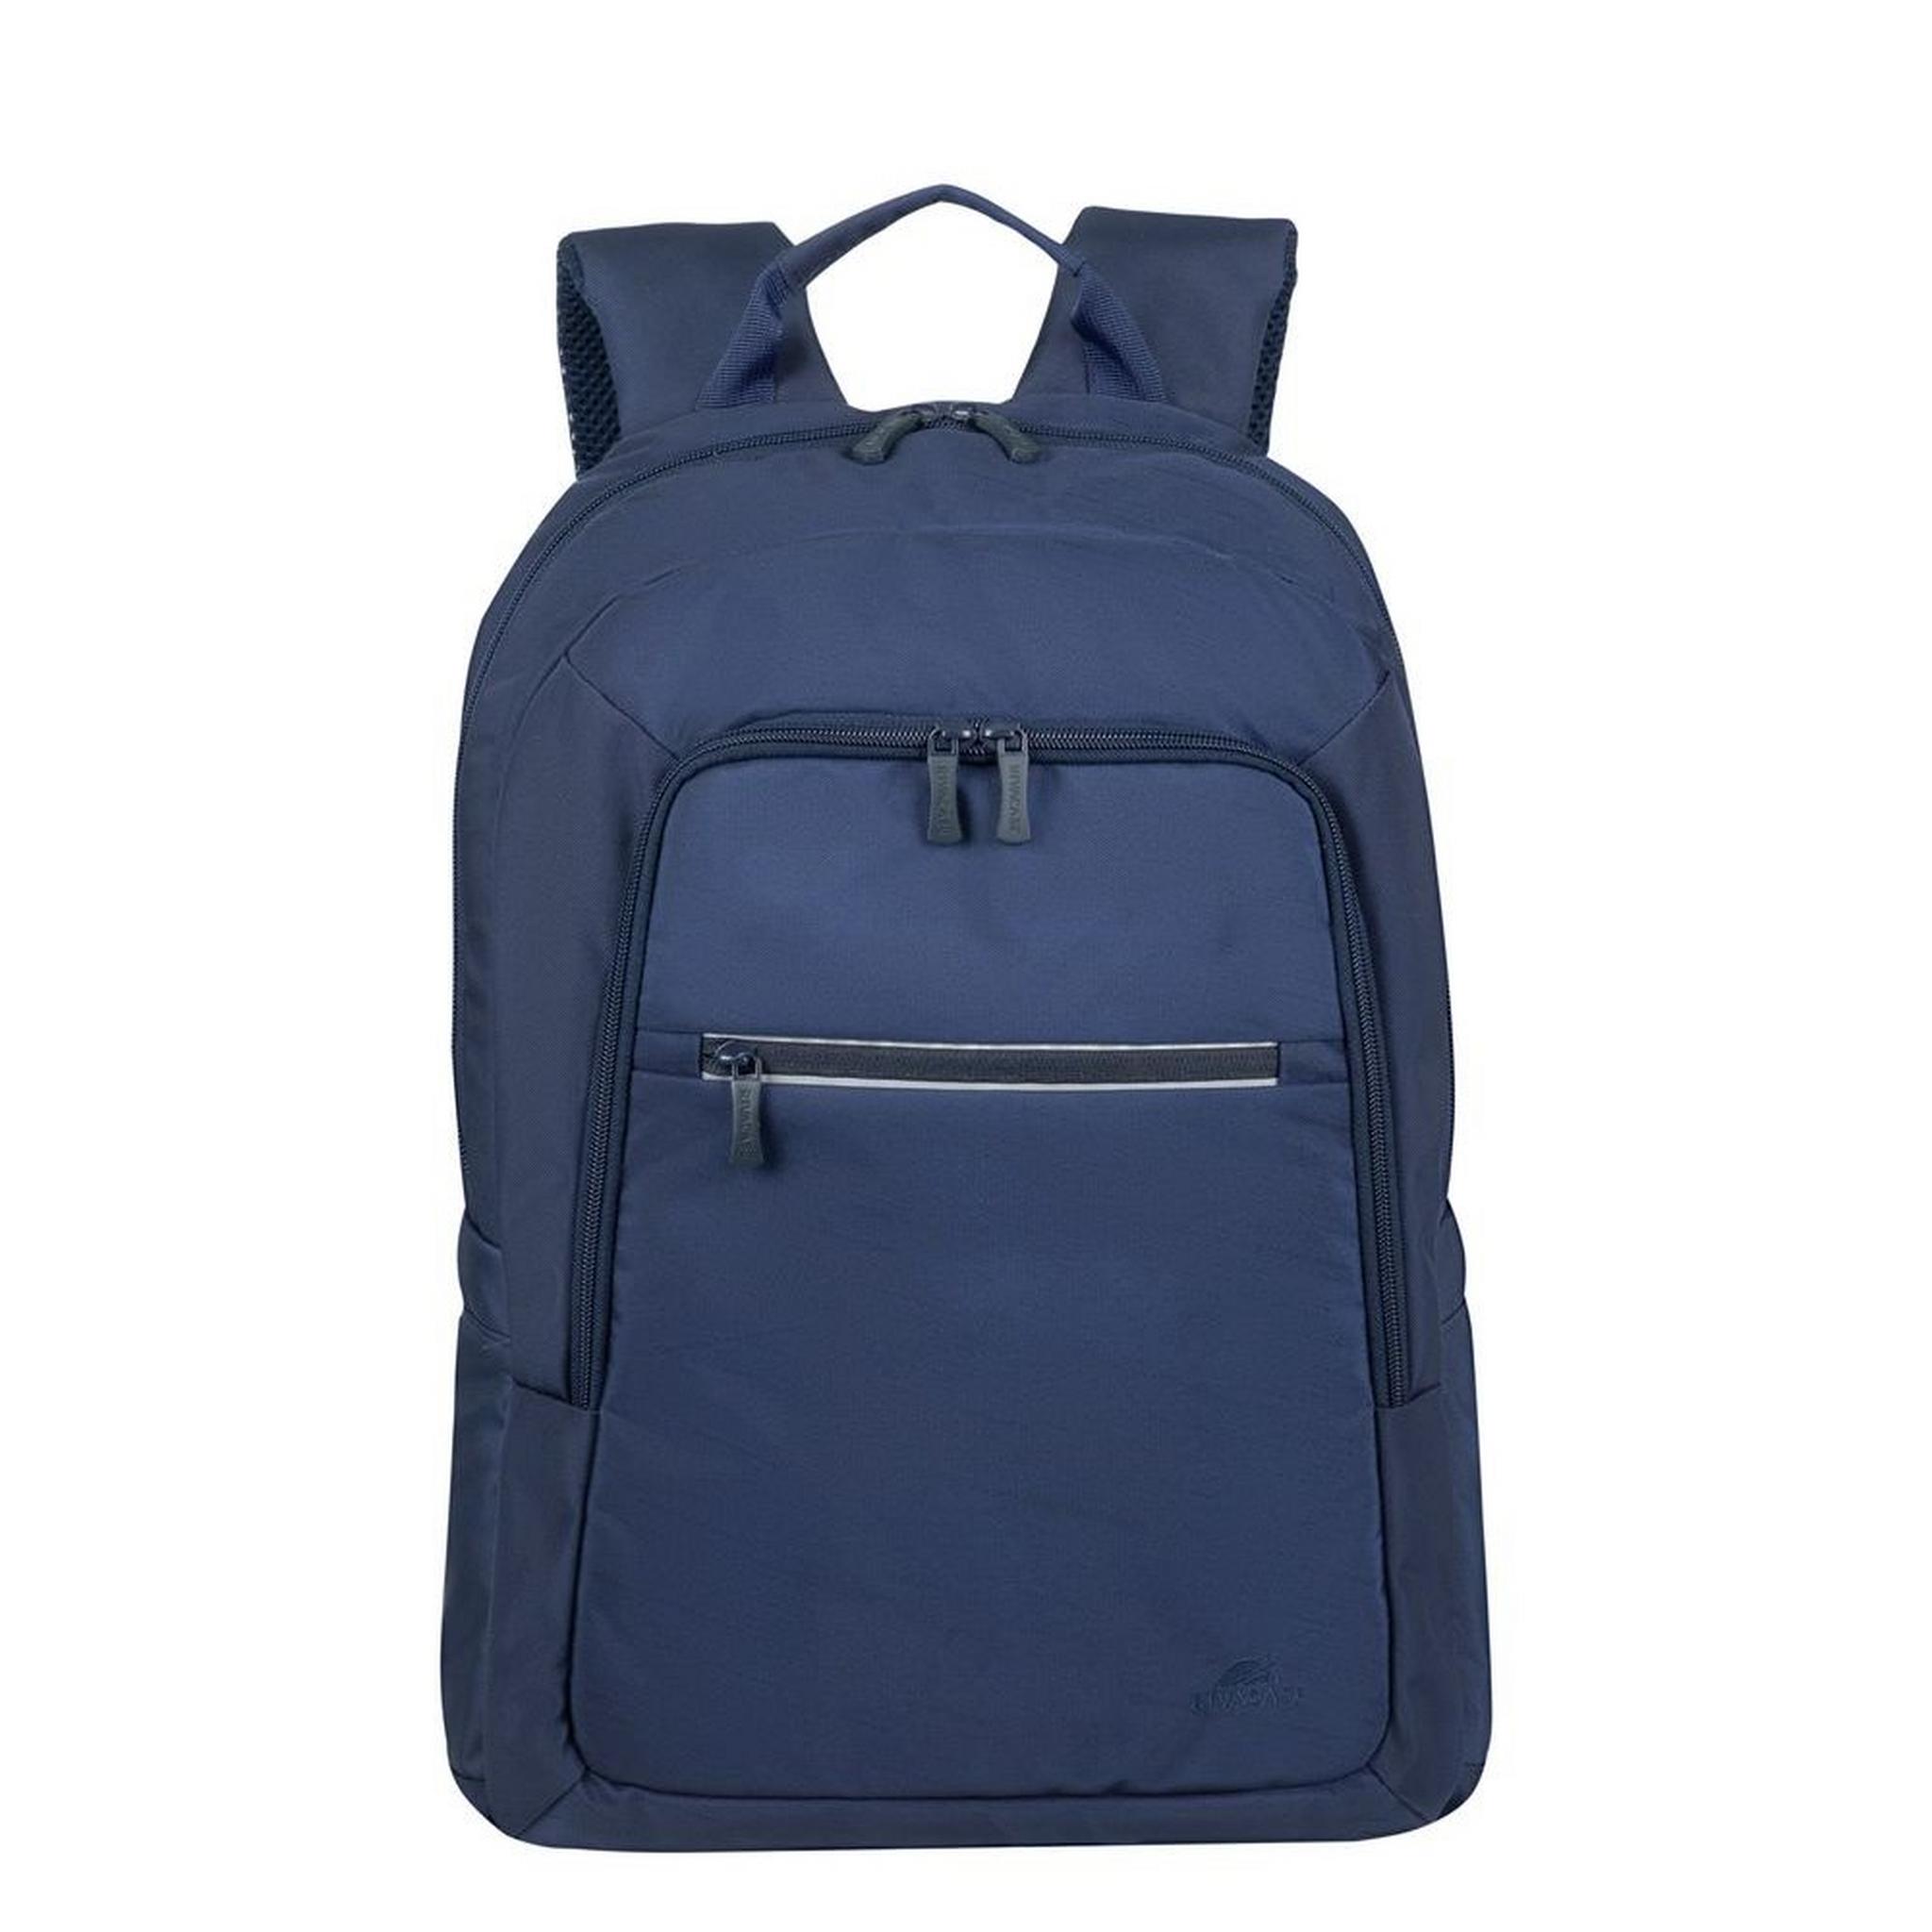 RIVA Alpendorf Laptop Backpack, 15.6 / 16-inch, ECO-7561 – Blue